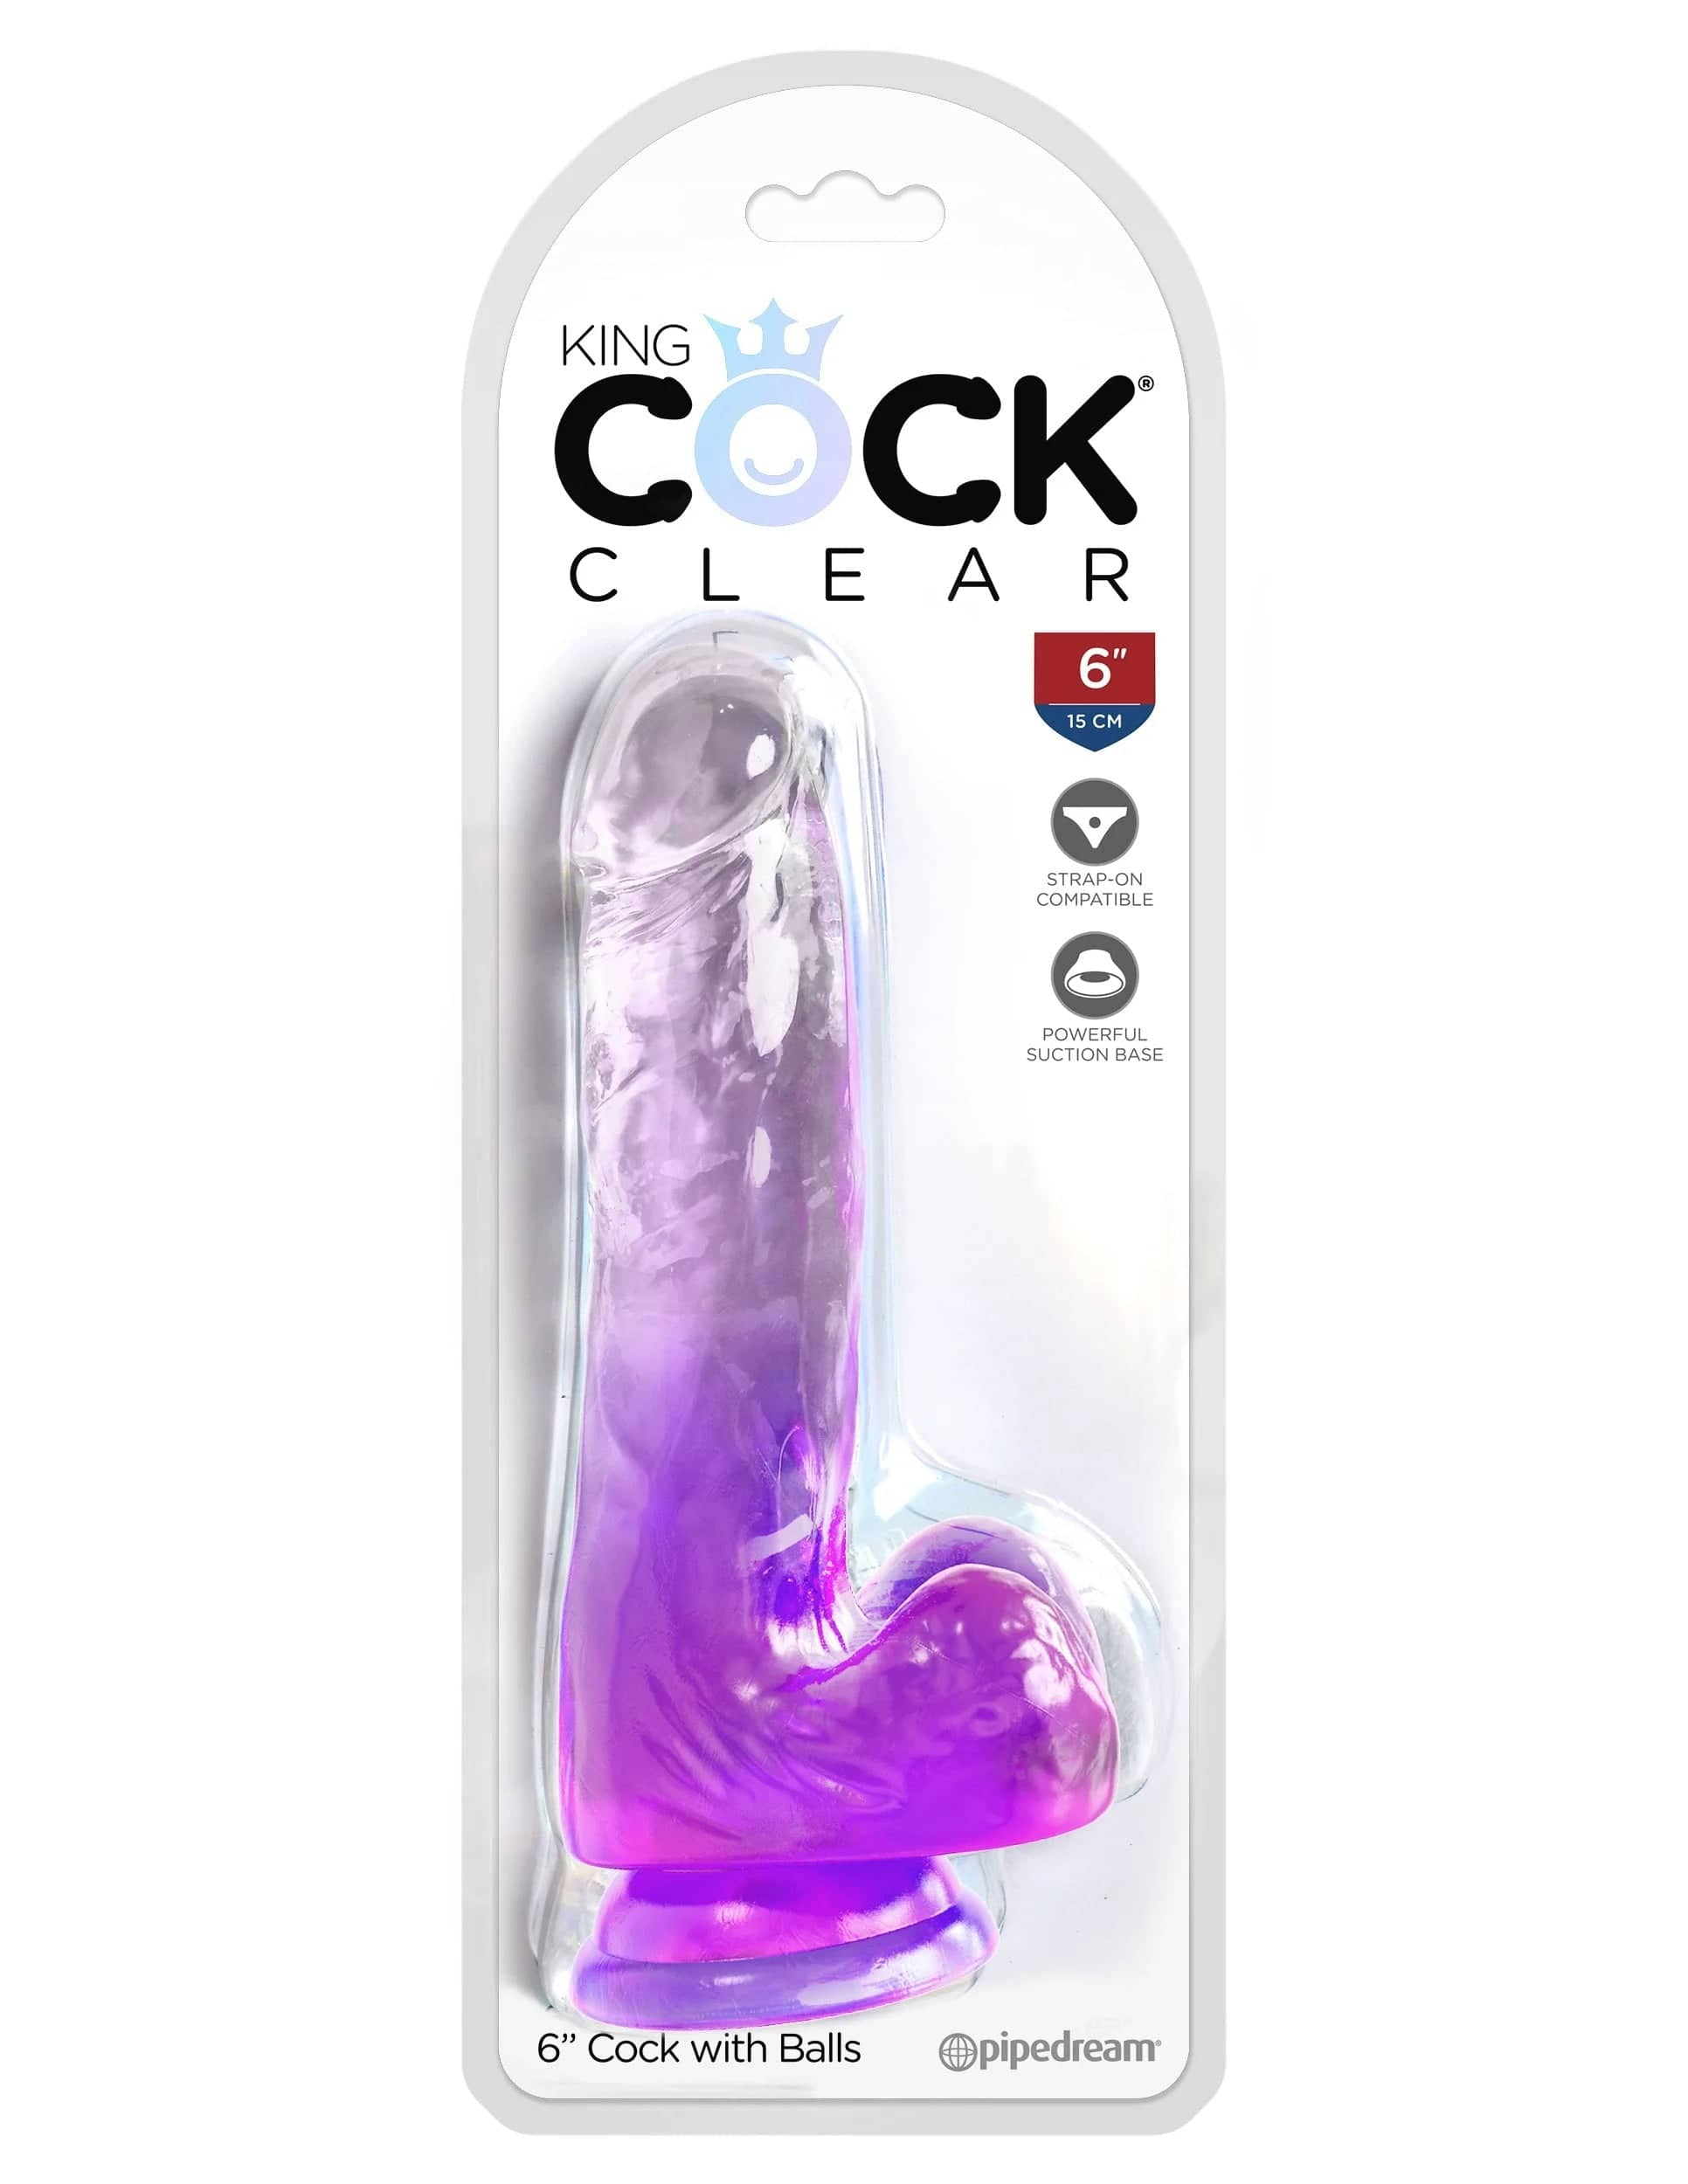 how to use suction cup dildo, vibrating suction dildo